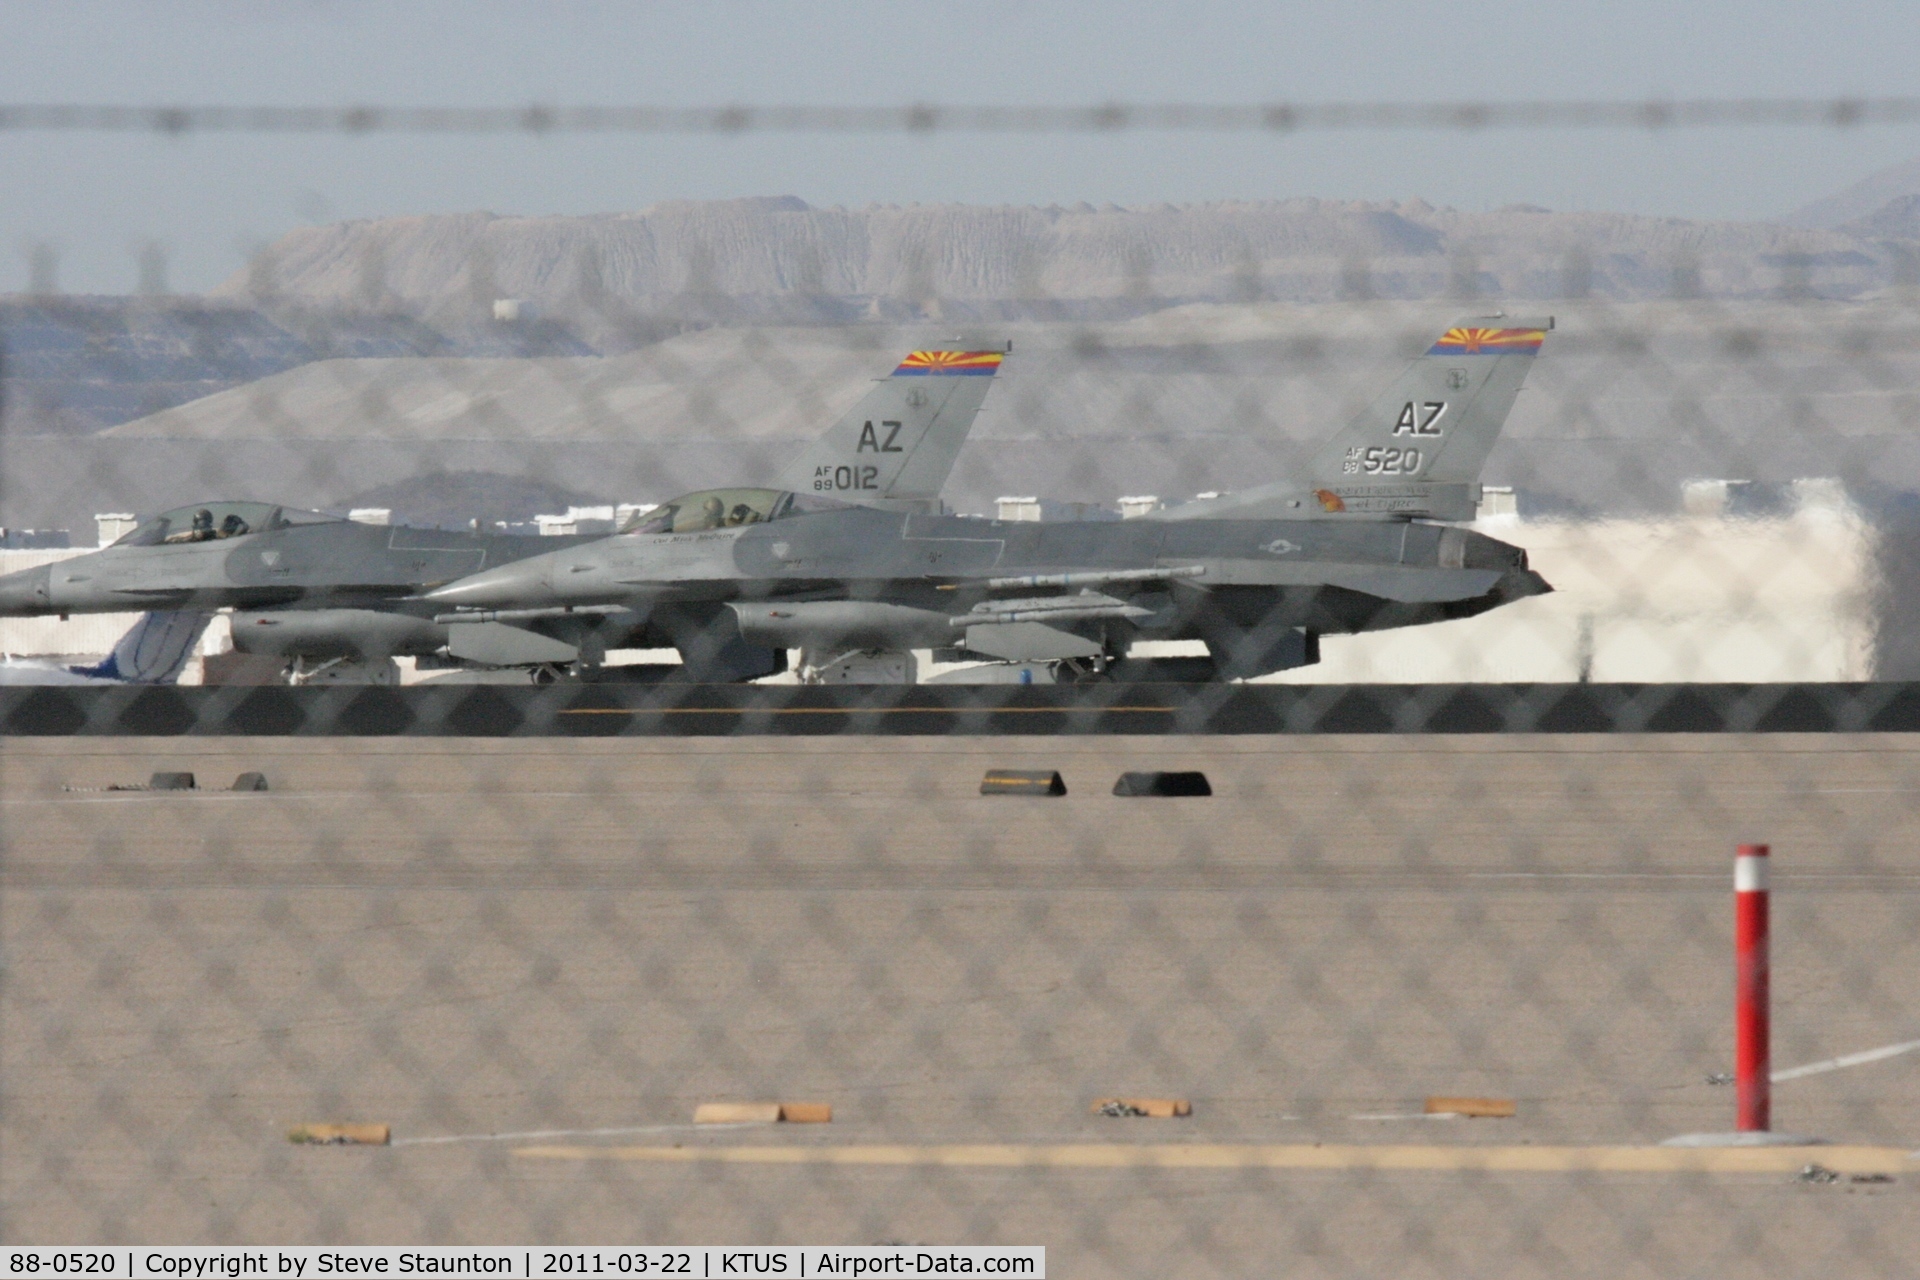 88-0520, General Dynamics F-16C C/N 1C-122, Taken at Tucson International Airport, in March 2011 whilst on an Aeroprint Aviation tour